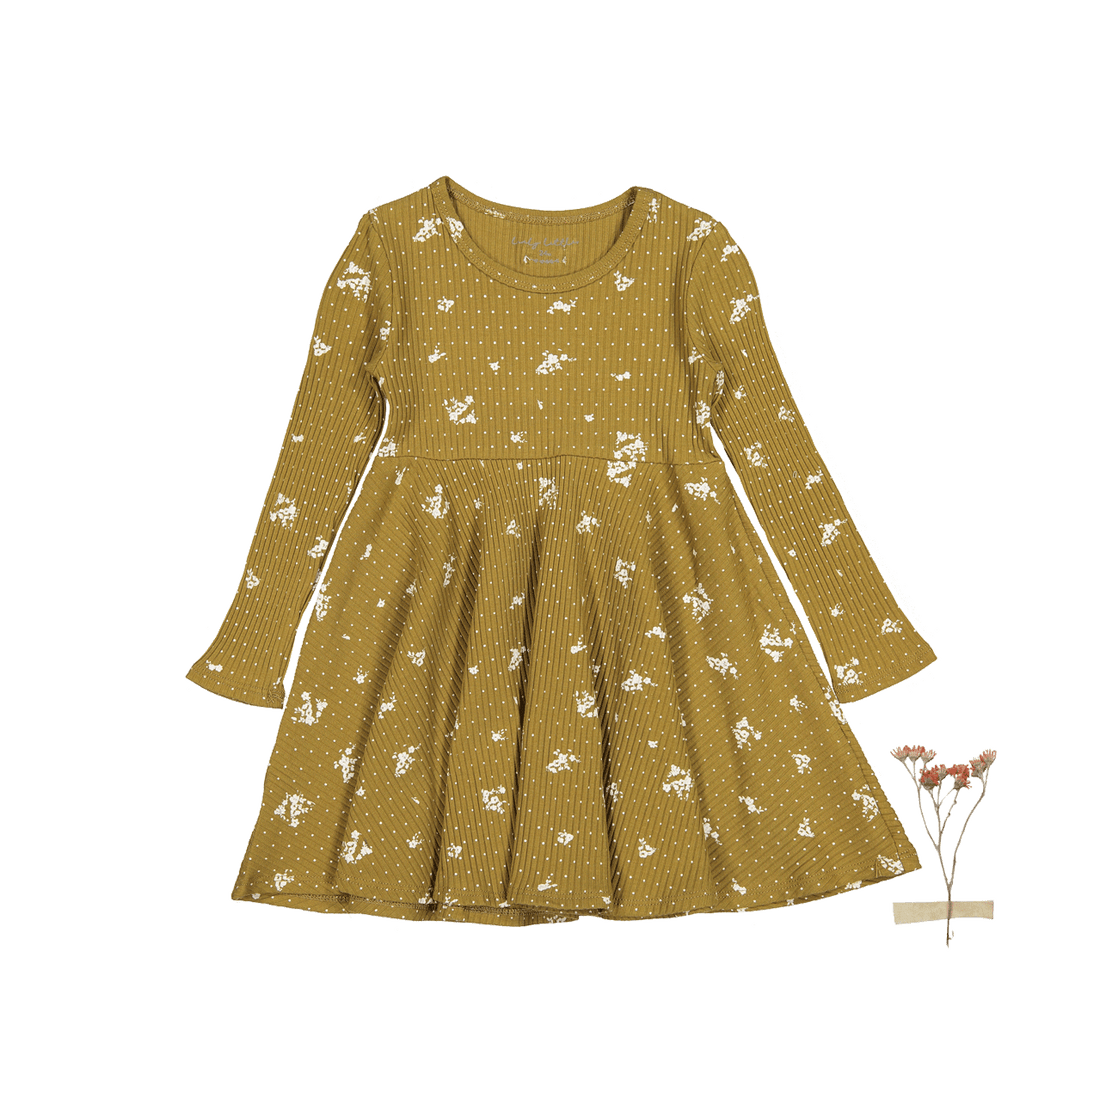 The Printed Long Sleeve Dress - Golden Floral